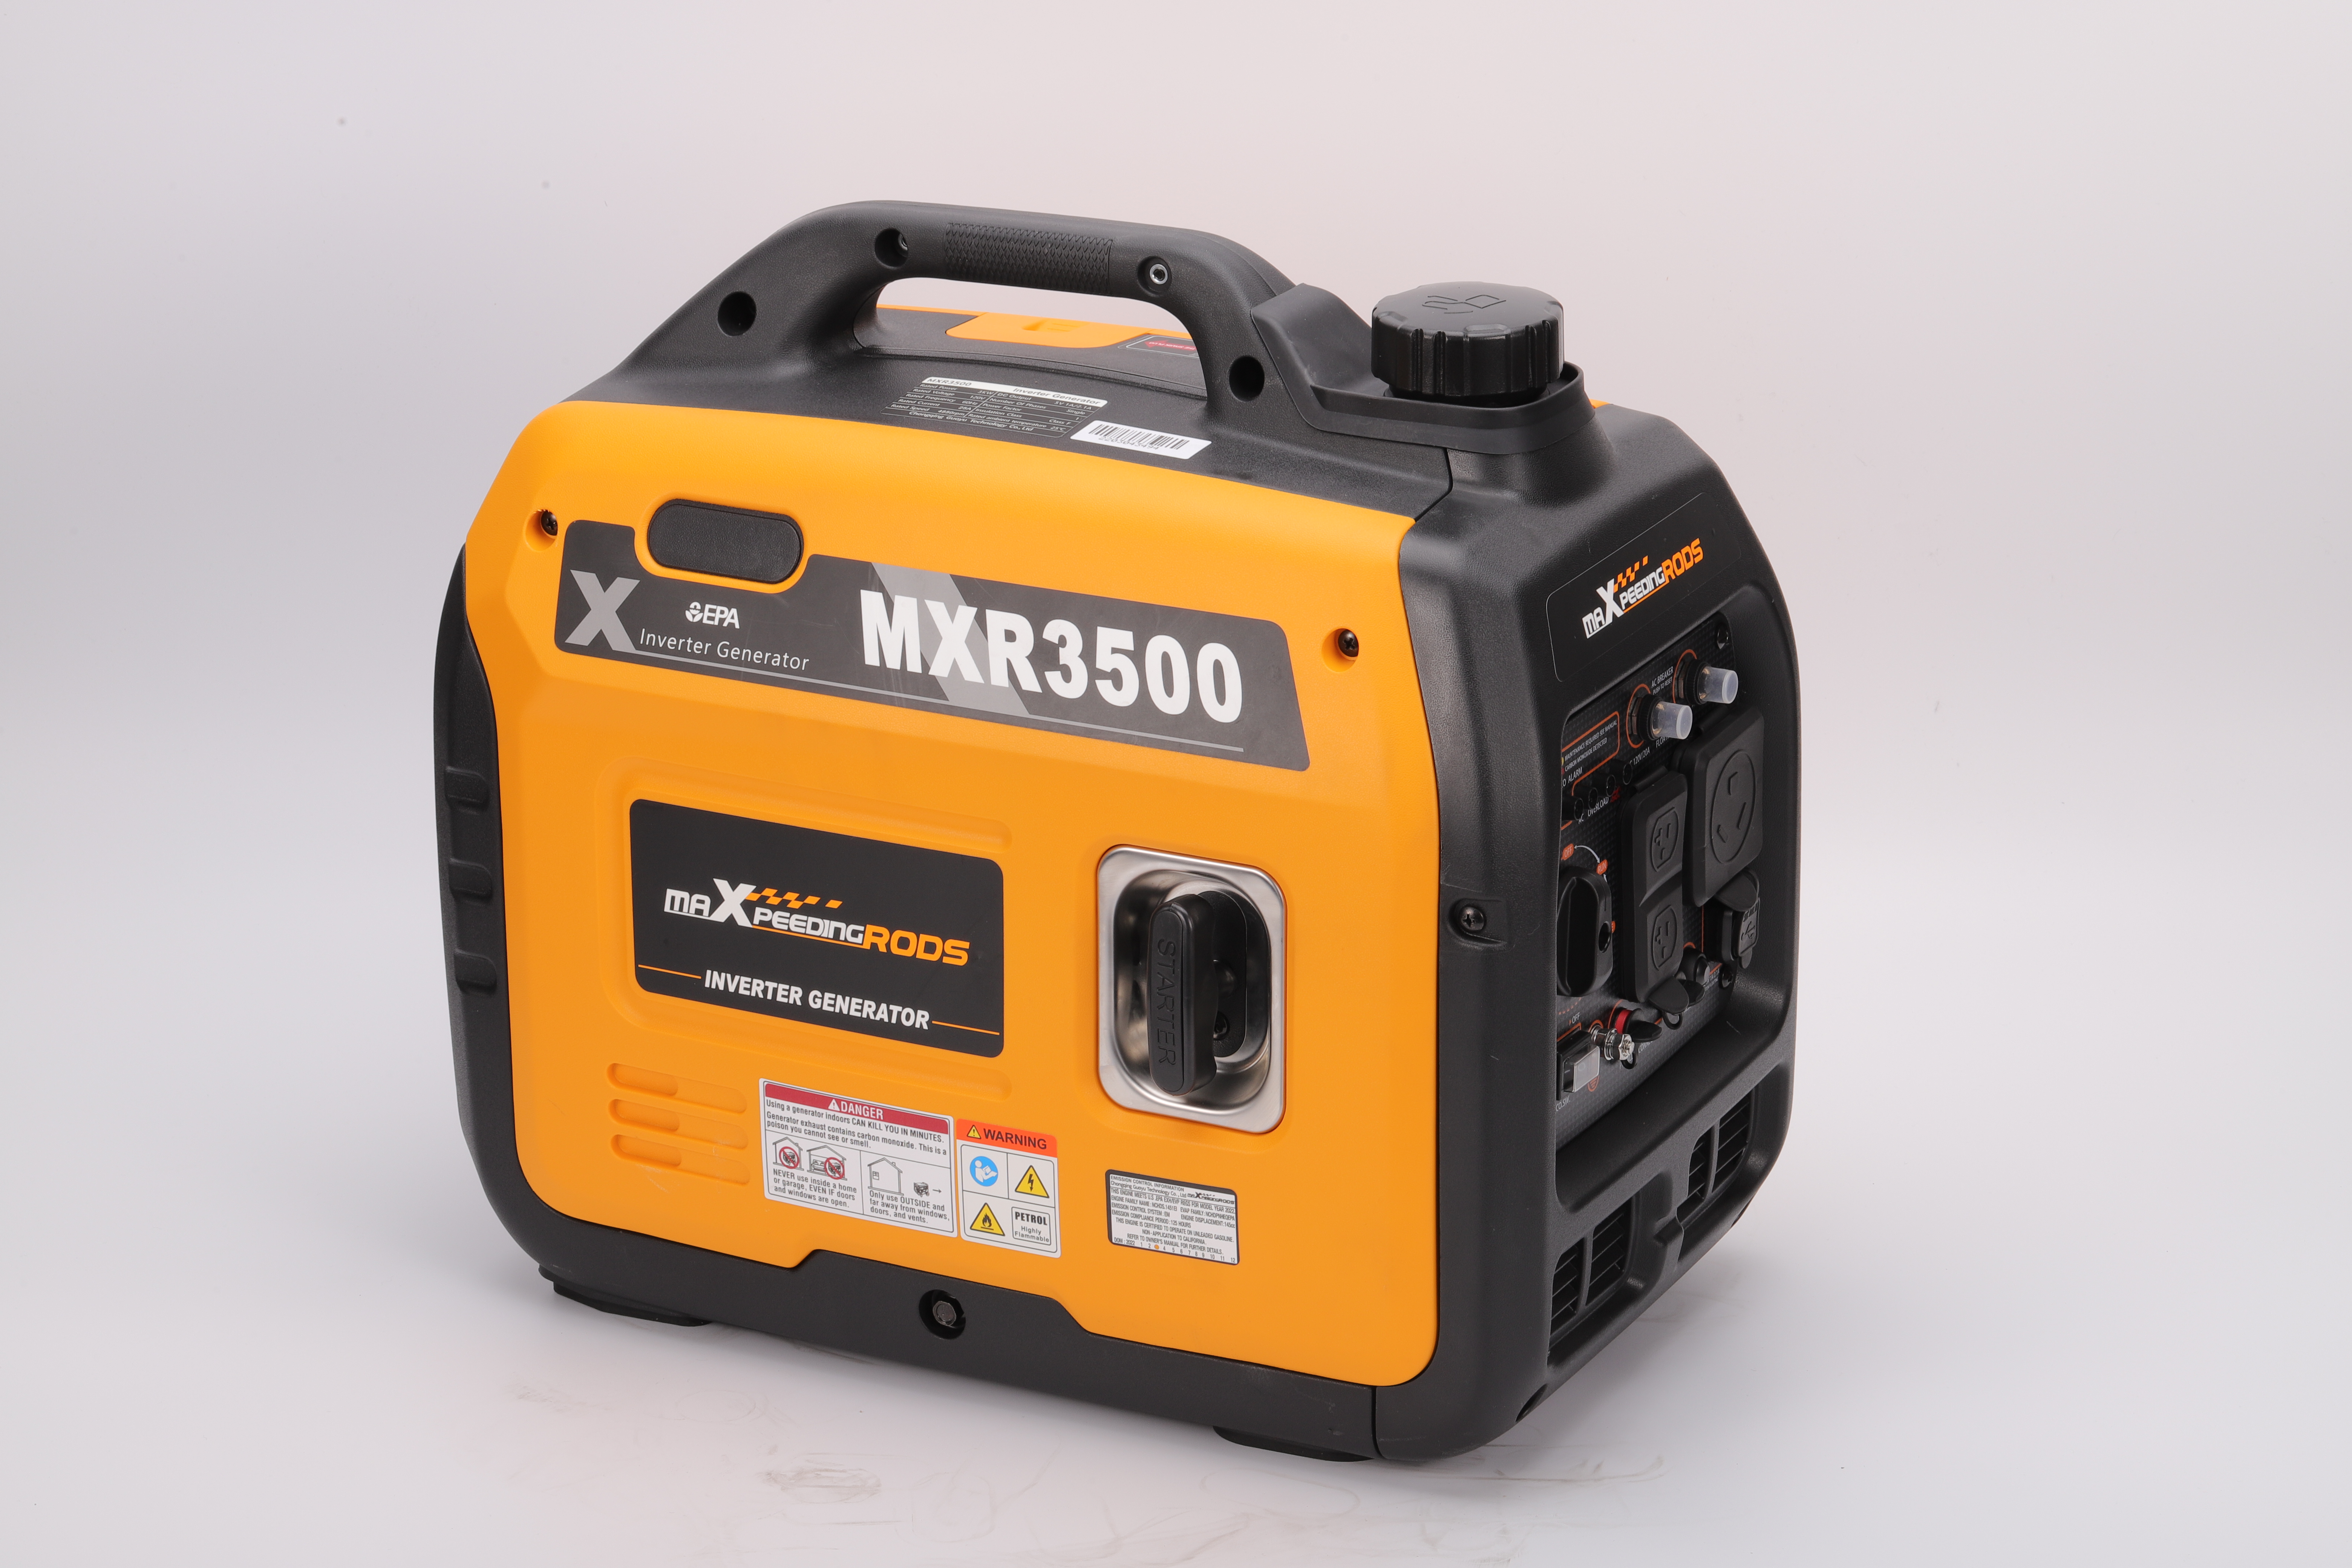 MaXpeedingRods Blog | An Automotive Blog from MaXpeedingRods - What’s the difference between rated power and peak power of generators?